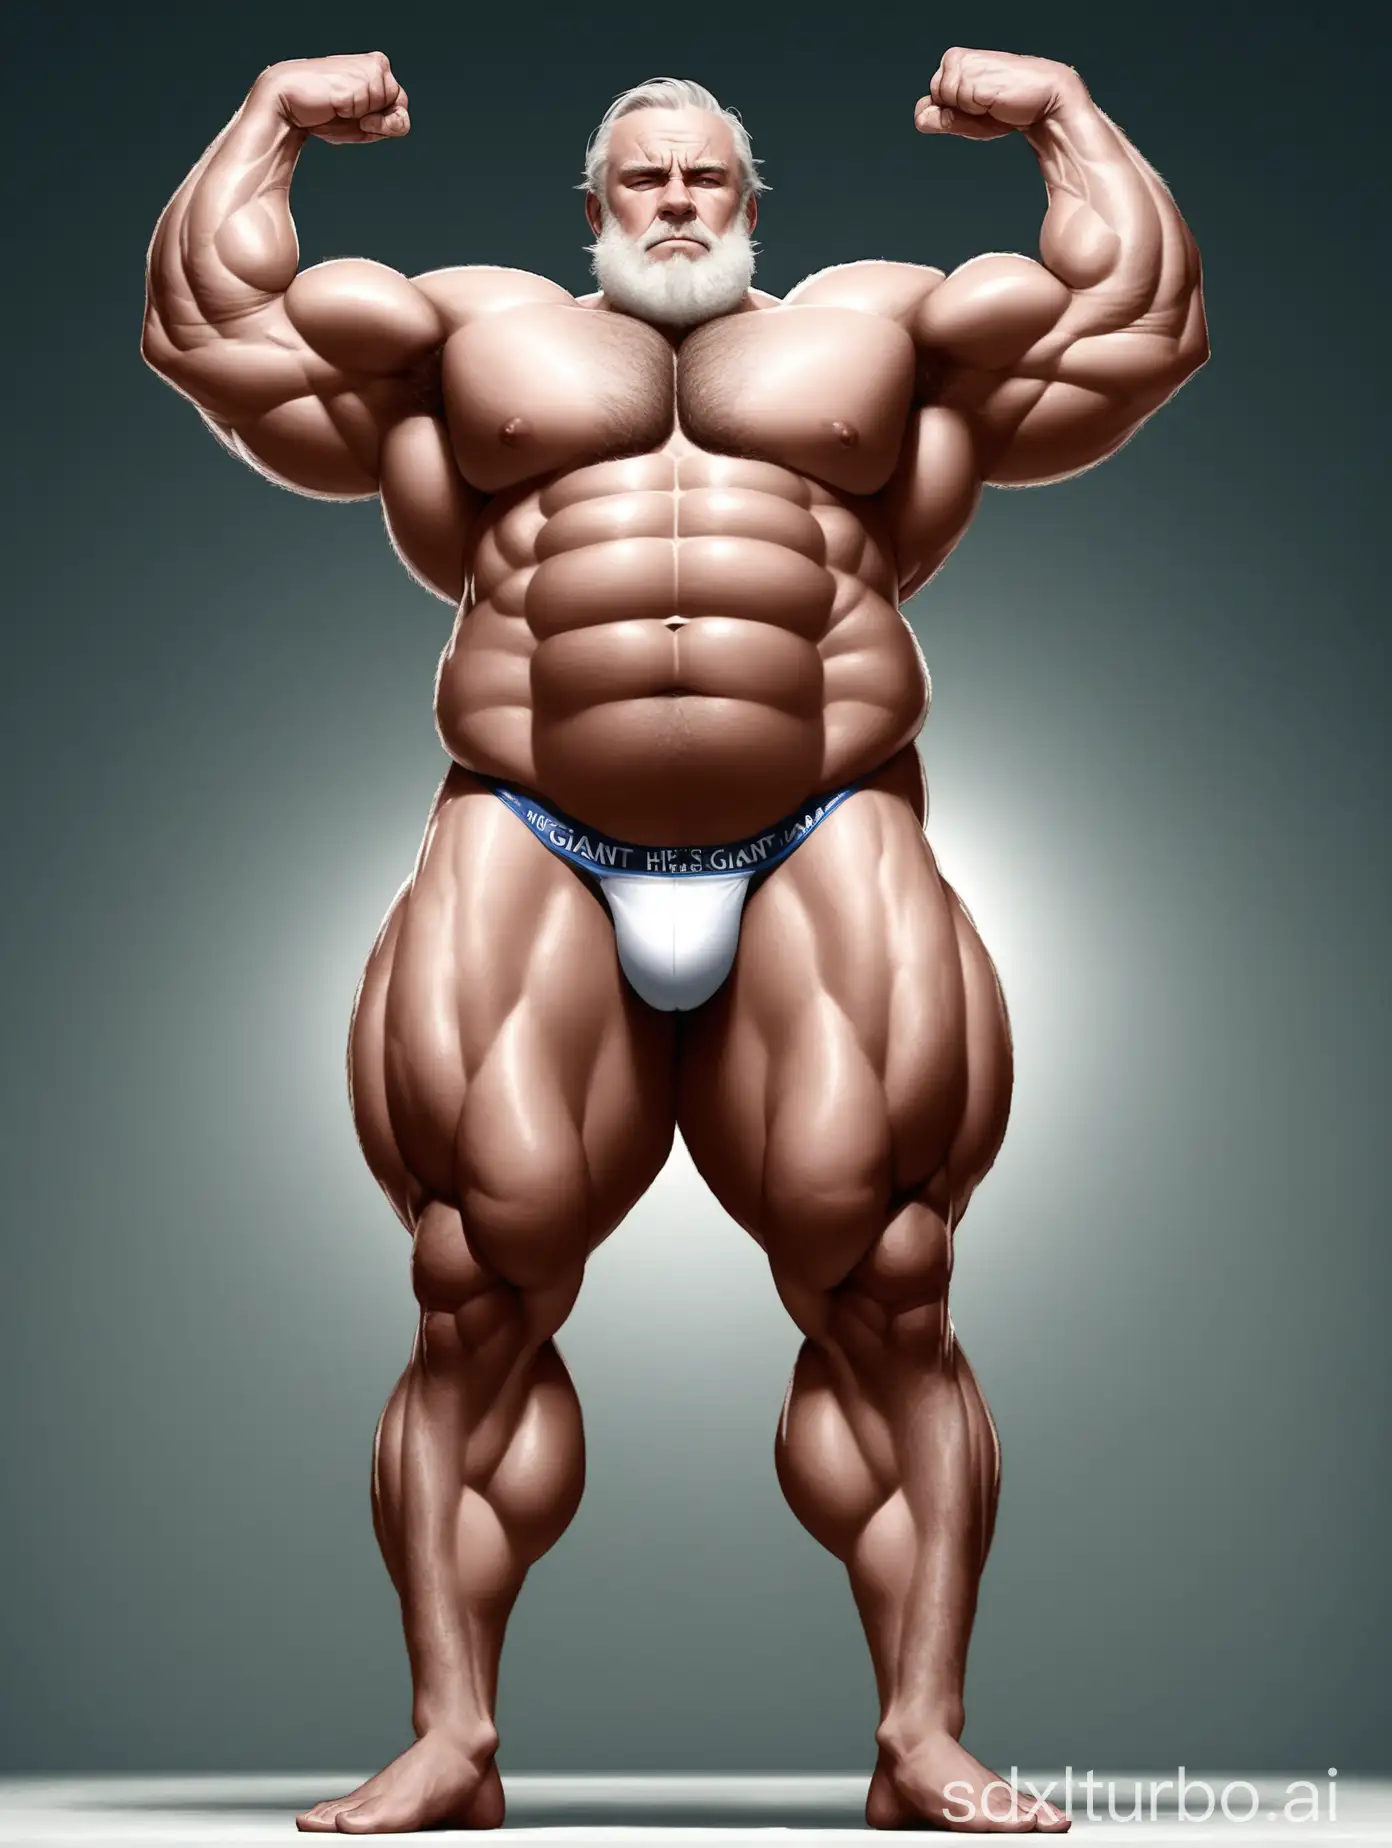 White skin and massive muscle stud, full bodyhair, Huge and giant and Strong body, Very strong legs, 2m tall, very Big Chest, very Big biceps, very 8-pack abs, Very Massive muscle Body, Wearing underwear, he is giant tall, very fat, very fat, Full Body, very long strong legs, raise his arms to show his huge biceps, raise his arms to show his huge biceps, very old man, very handsome men.